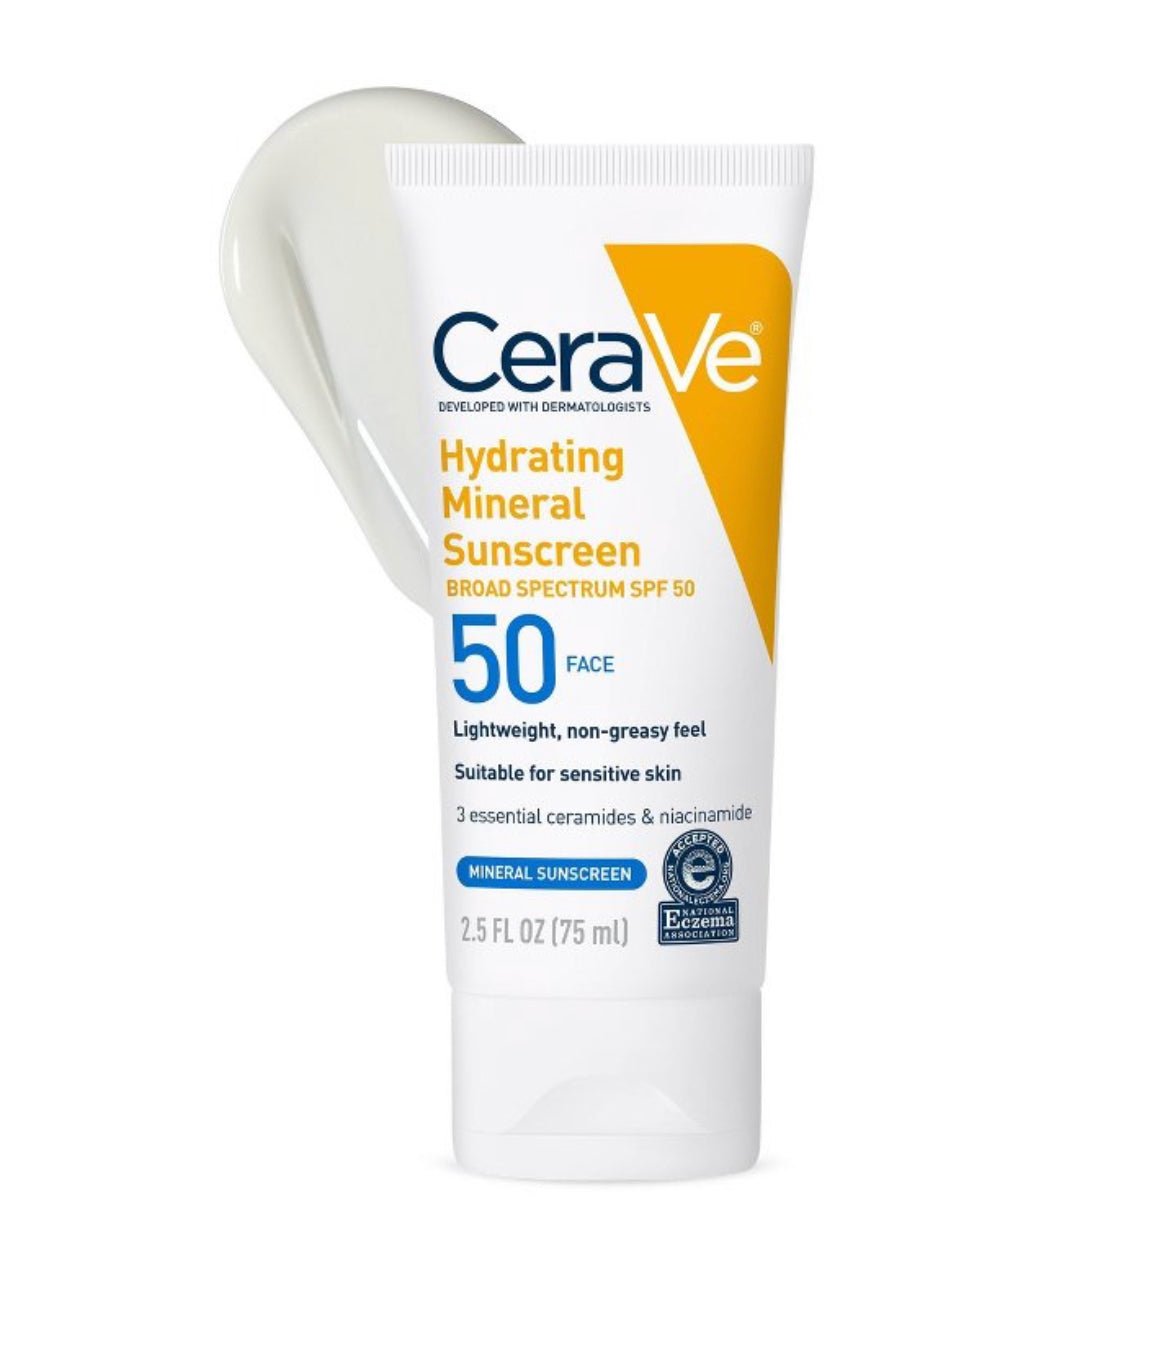 Cerave Hydrating Mineral Sunscreen SPF 50 - Seraphim Beauty